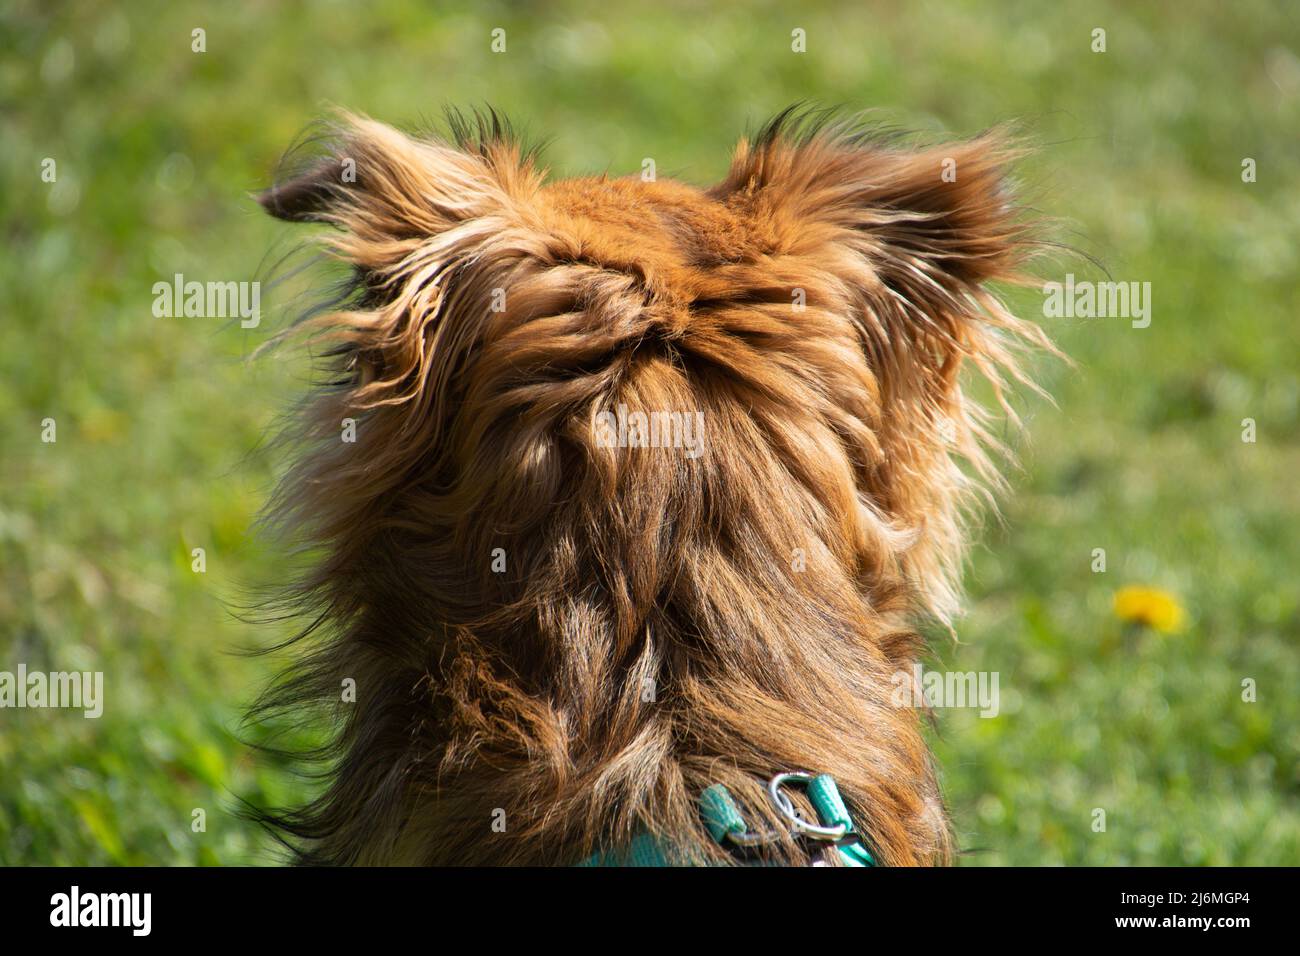 head of a pomchi dog from behind with beautiful long red hair Stock Photo